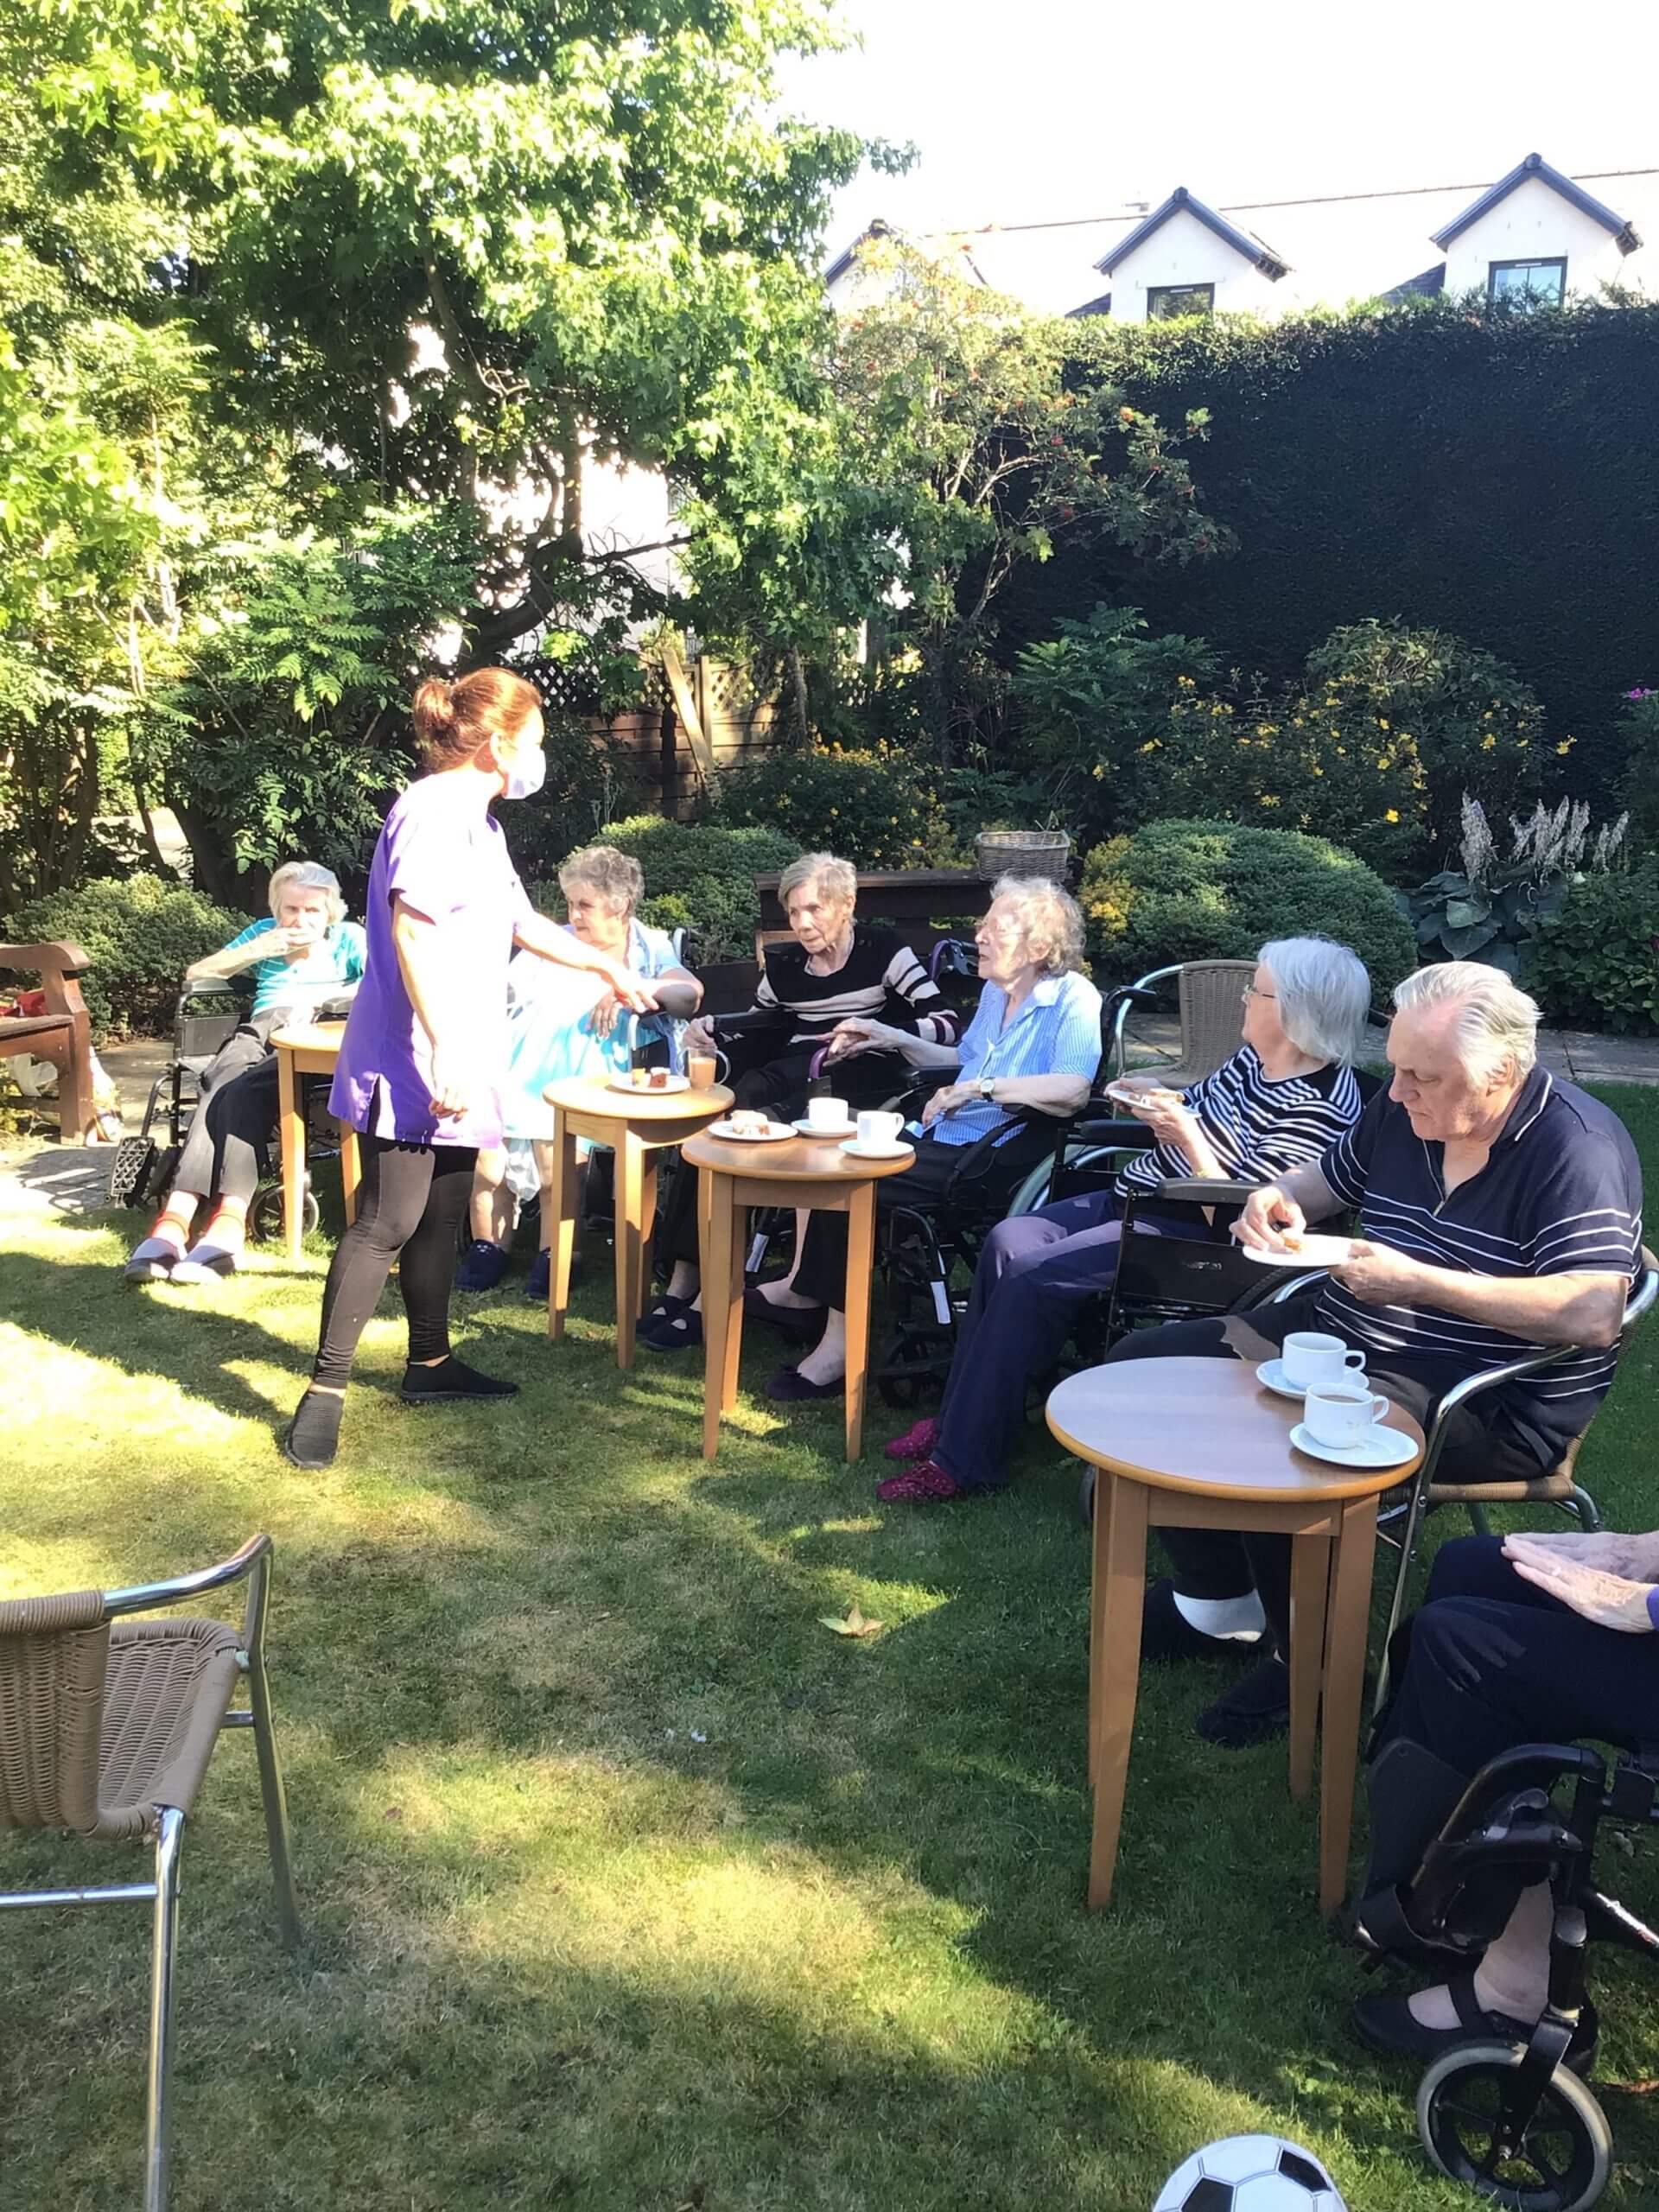 Residents gathered in the garden